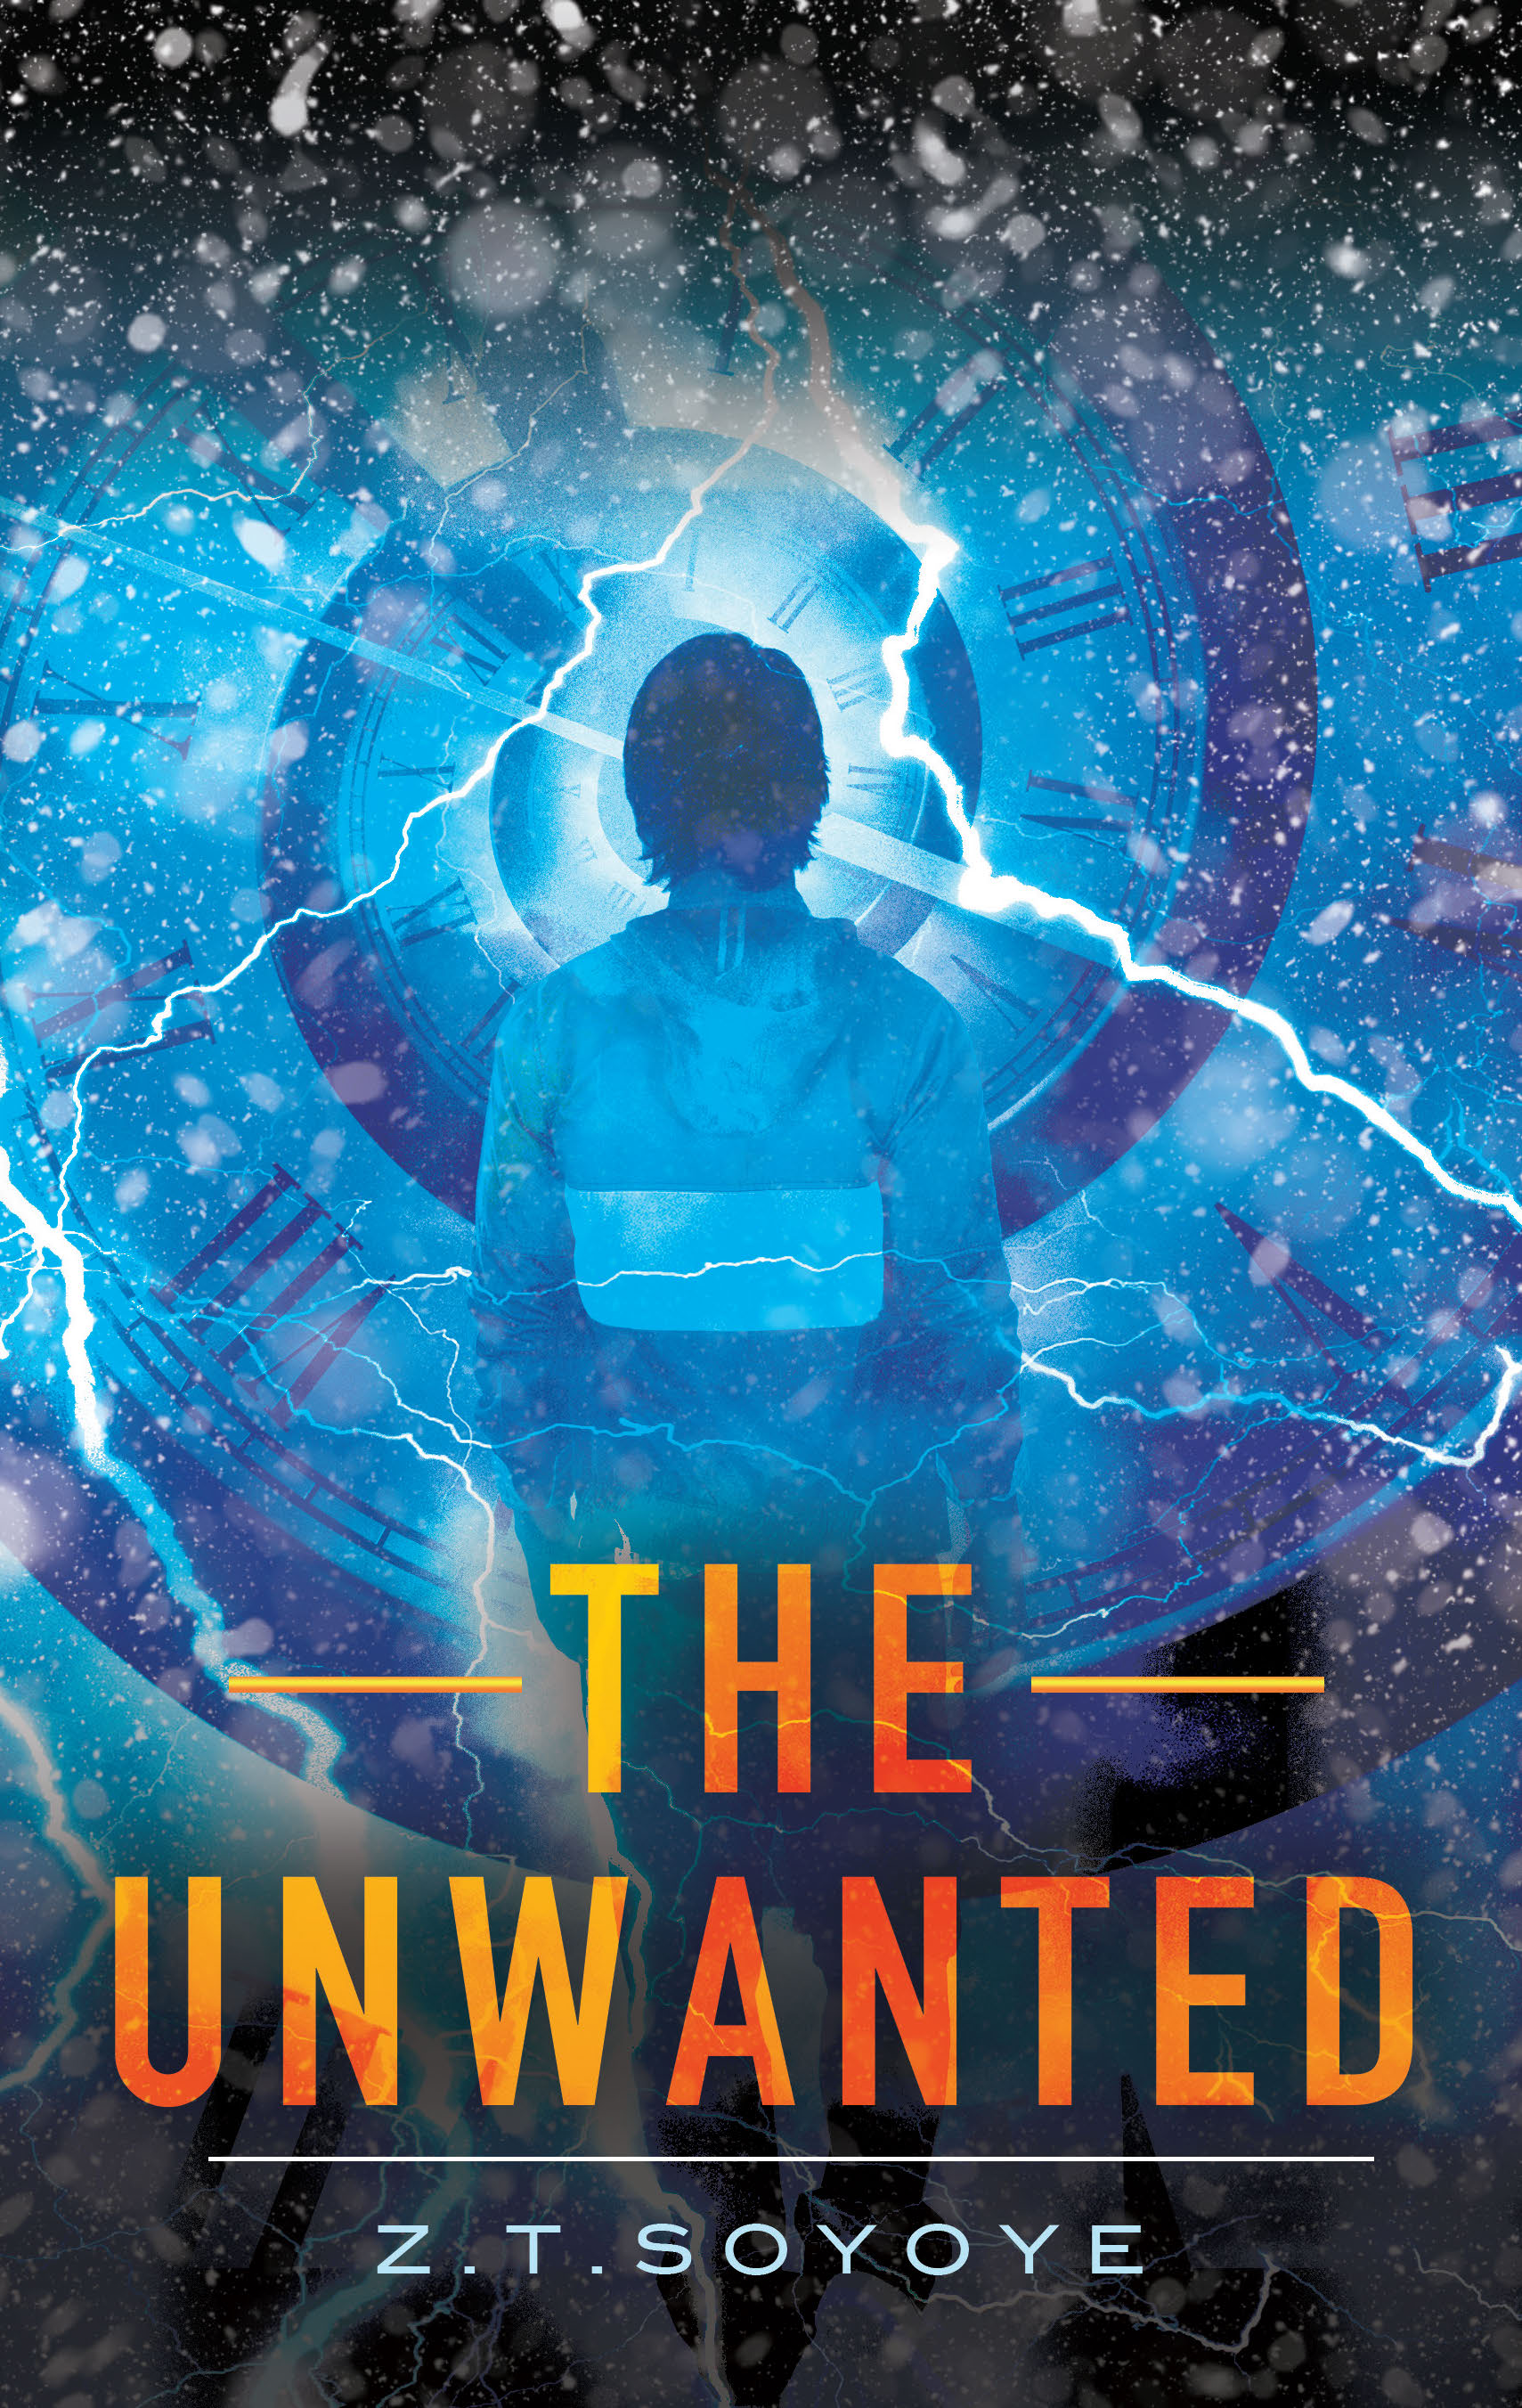 The Unwanted by ztsoyoye, a YA Fantasy Novel and Action-Adventure Mystery book